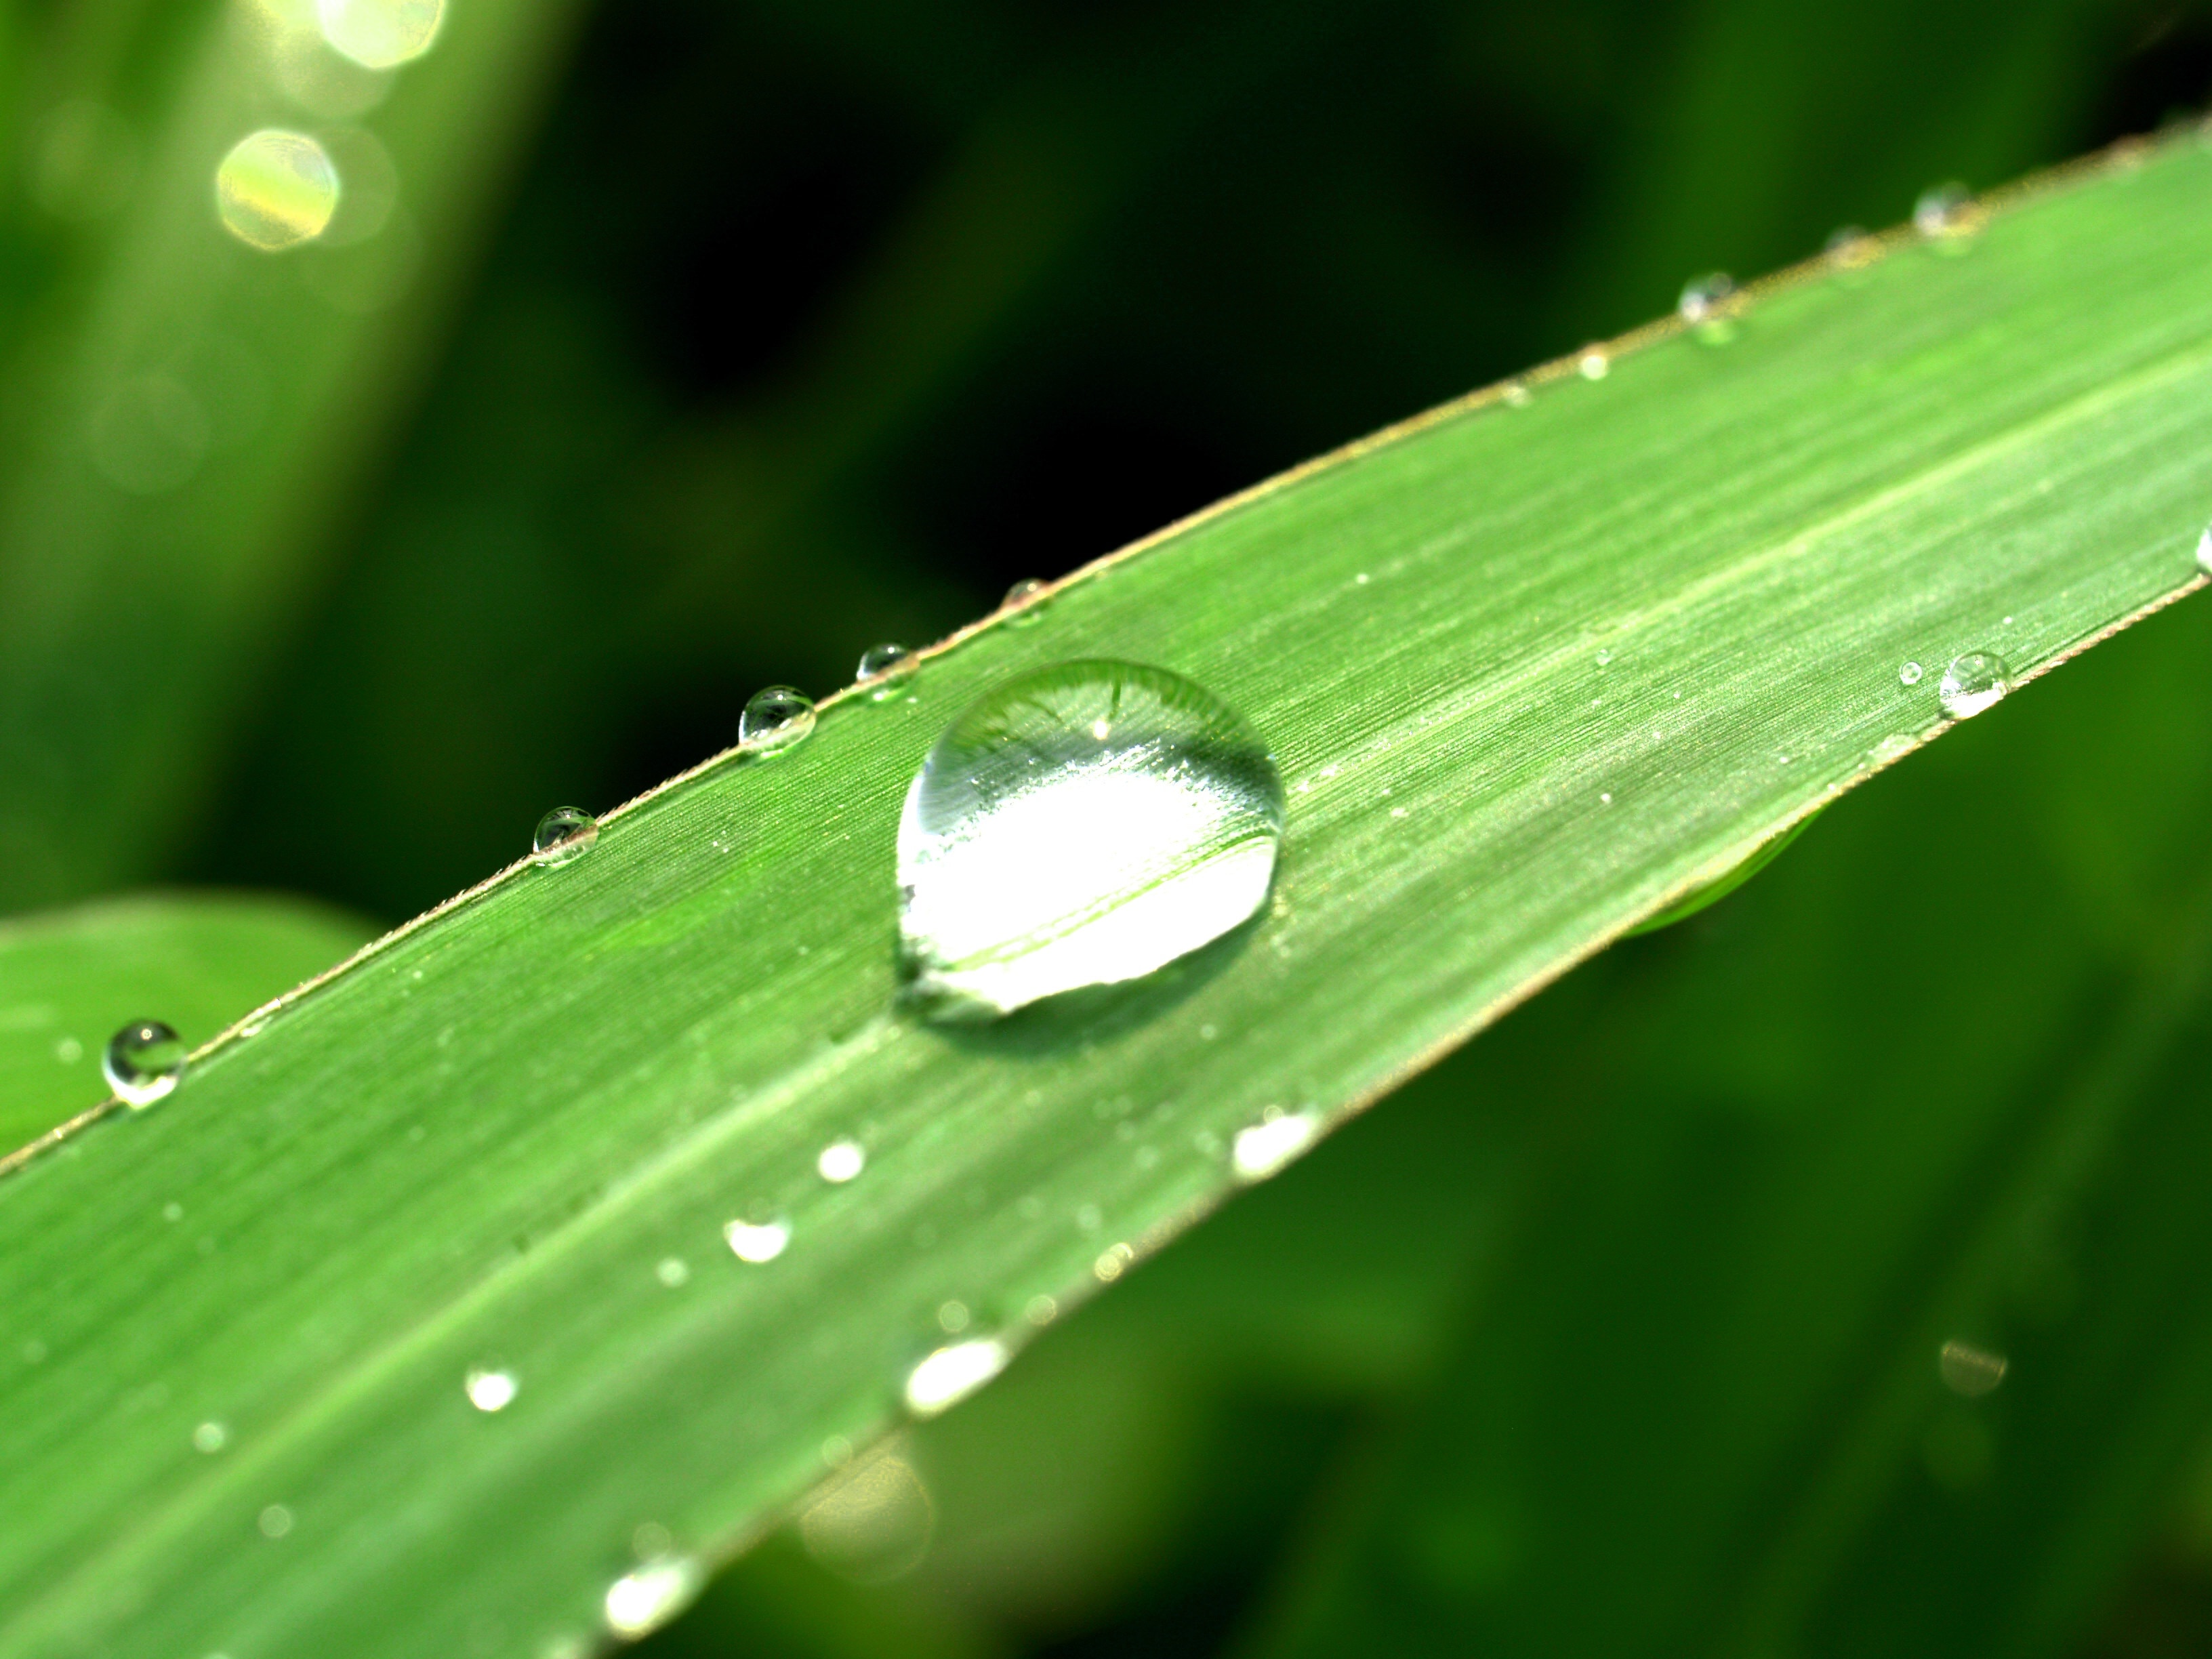 water droplets in green grass